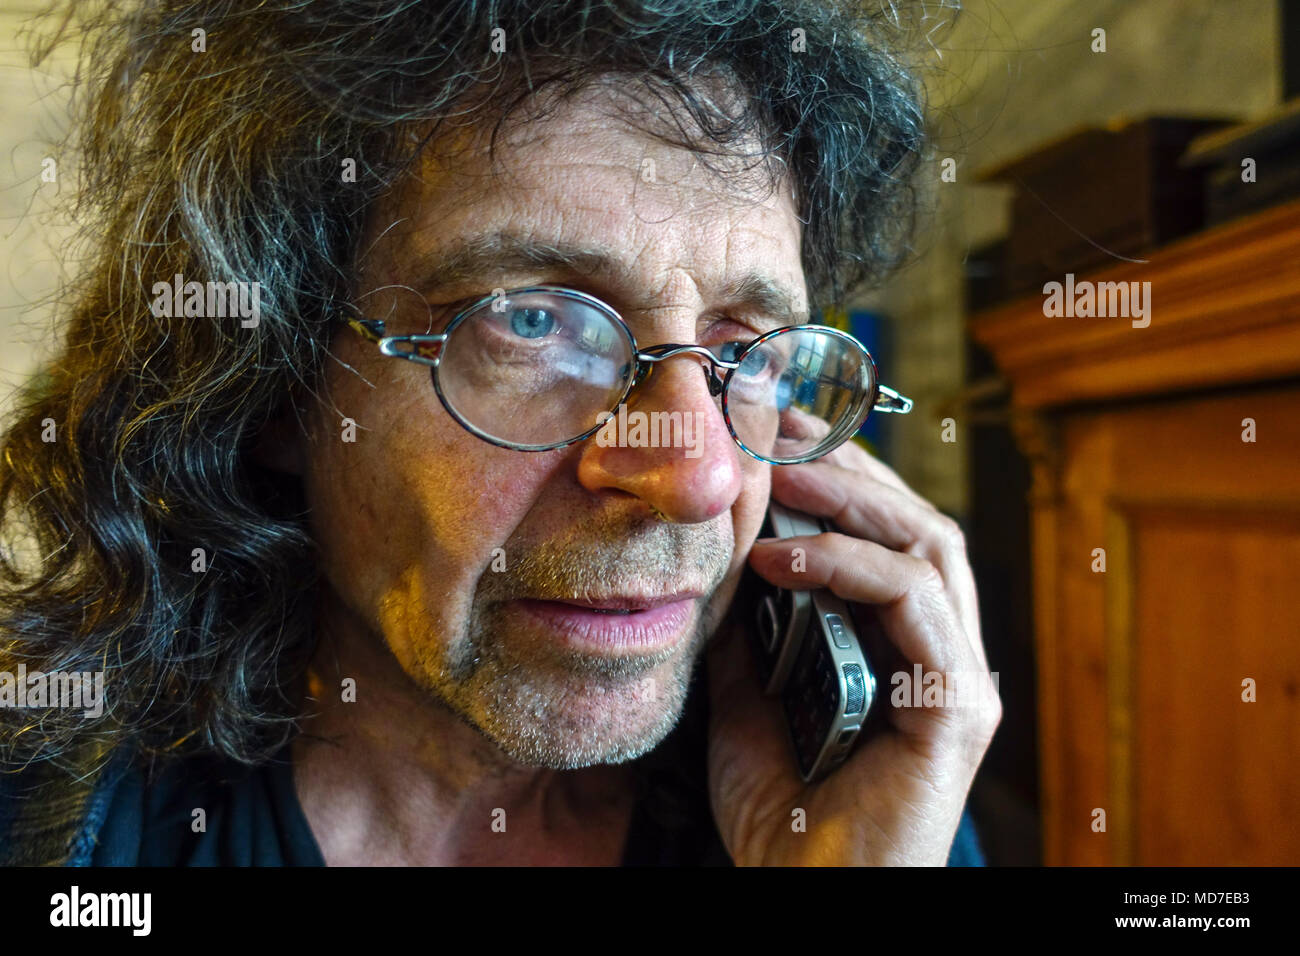 Senior man Person On phone at home Inside portrait 60s Senior calling in glasses using a mobile phone Czech senior portrait in active life Stock Photo